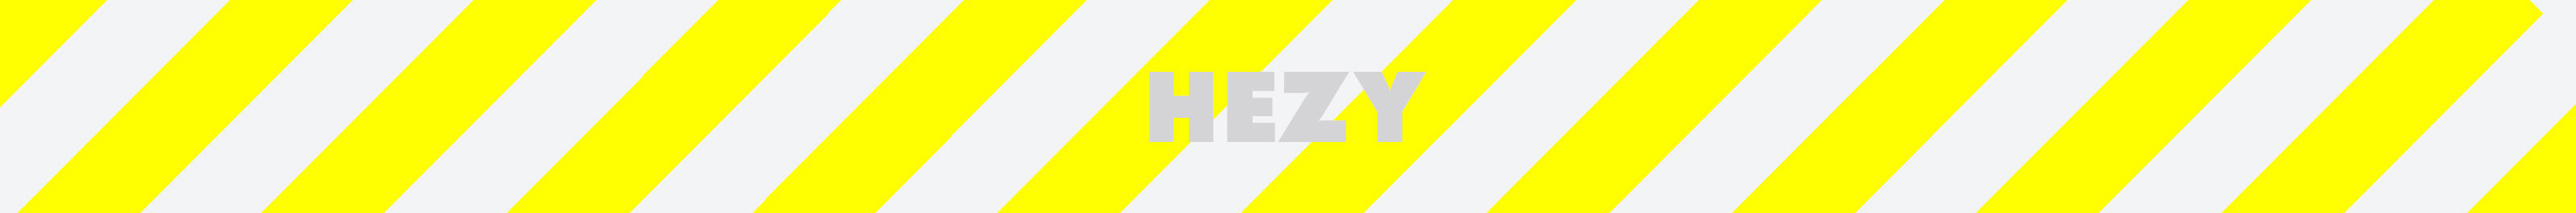 Mr. Hezy's profile banner